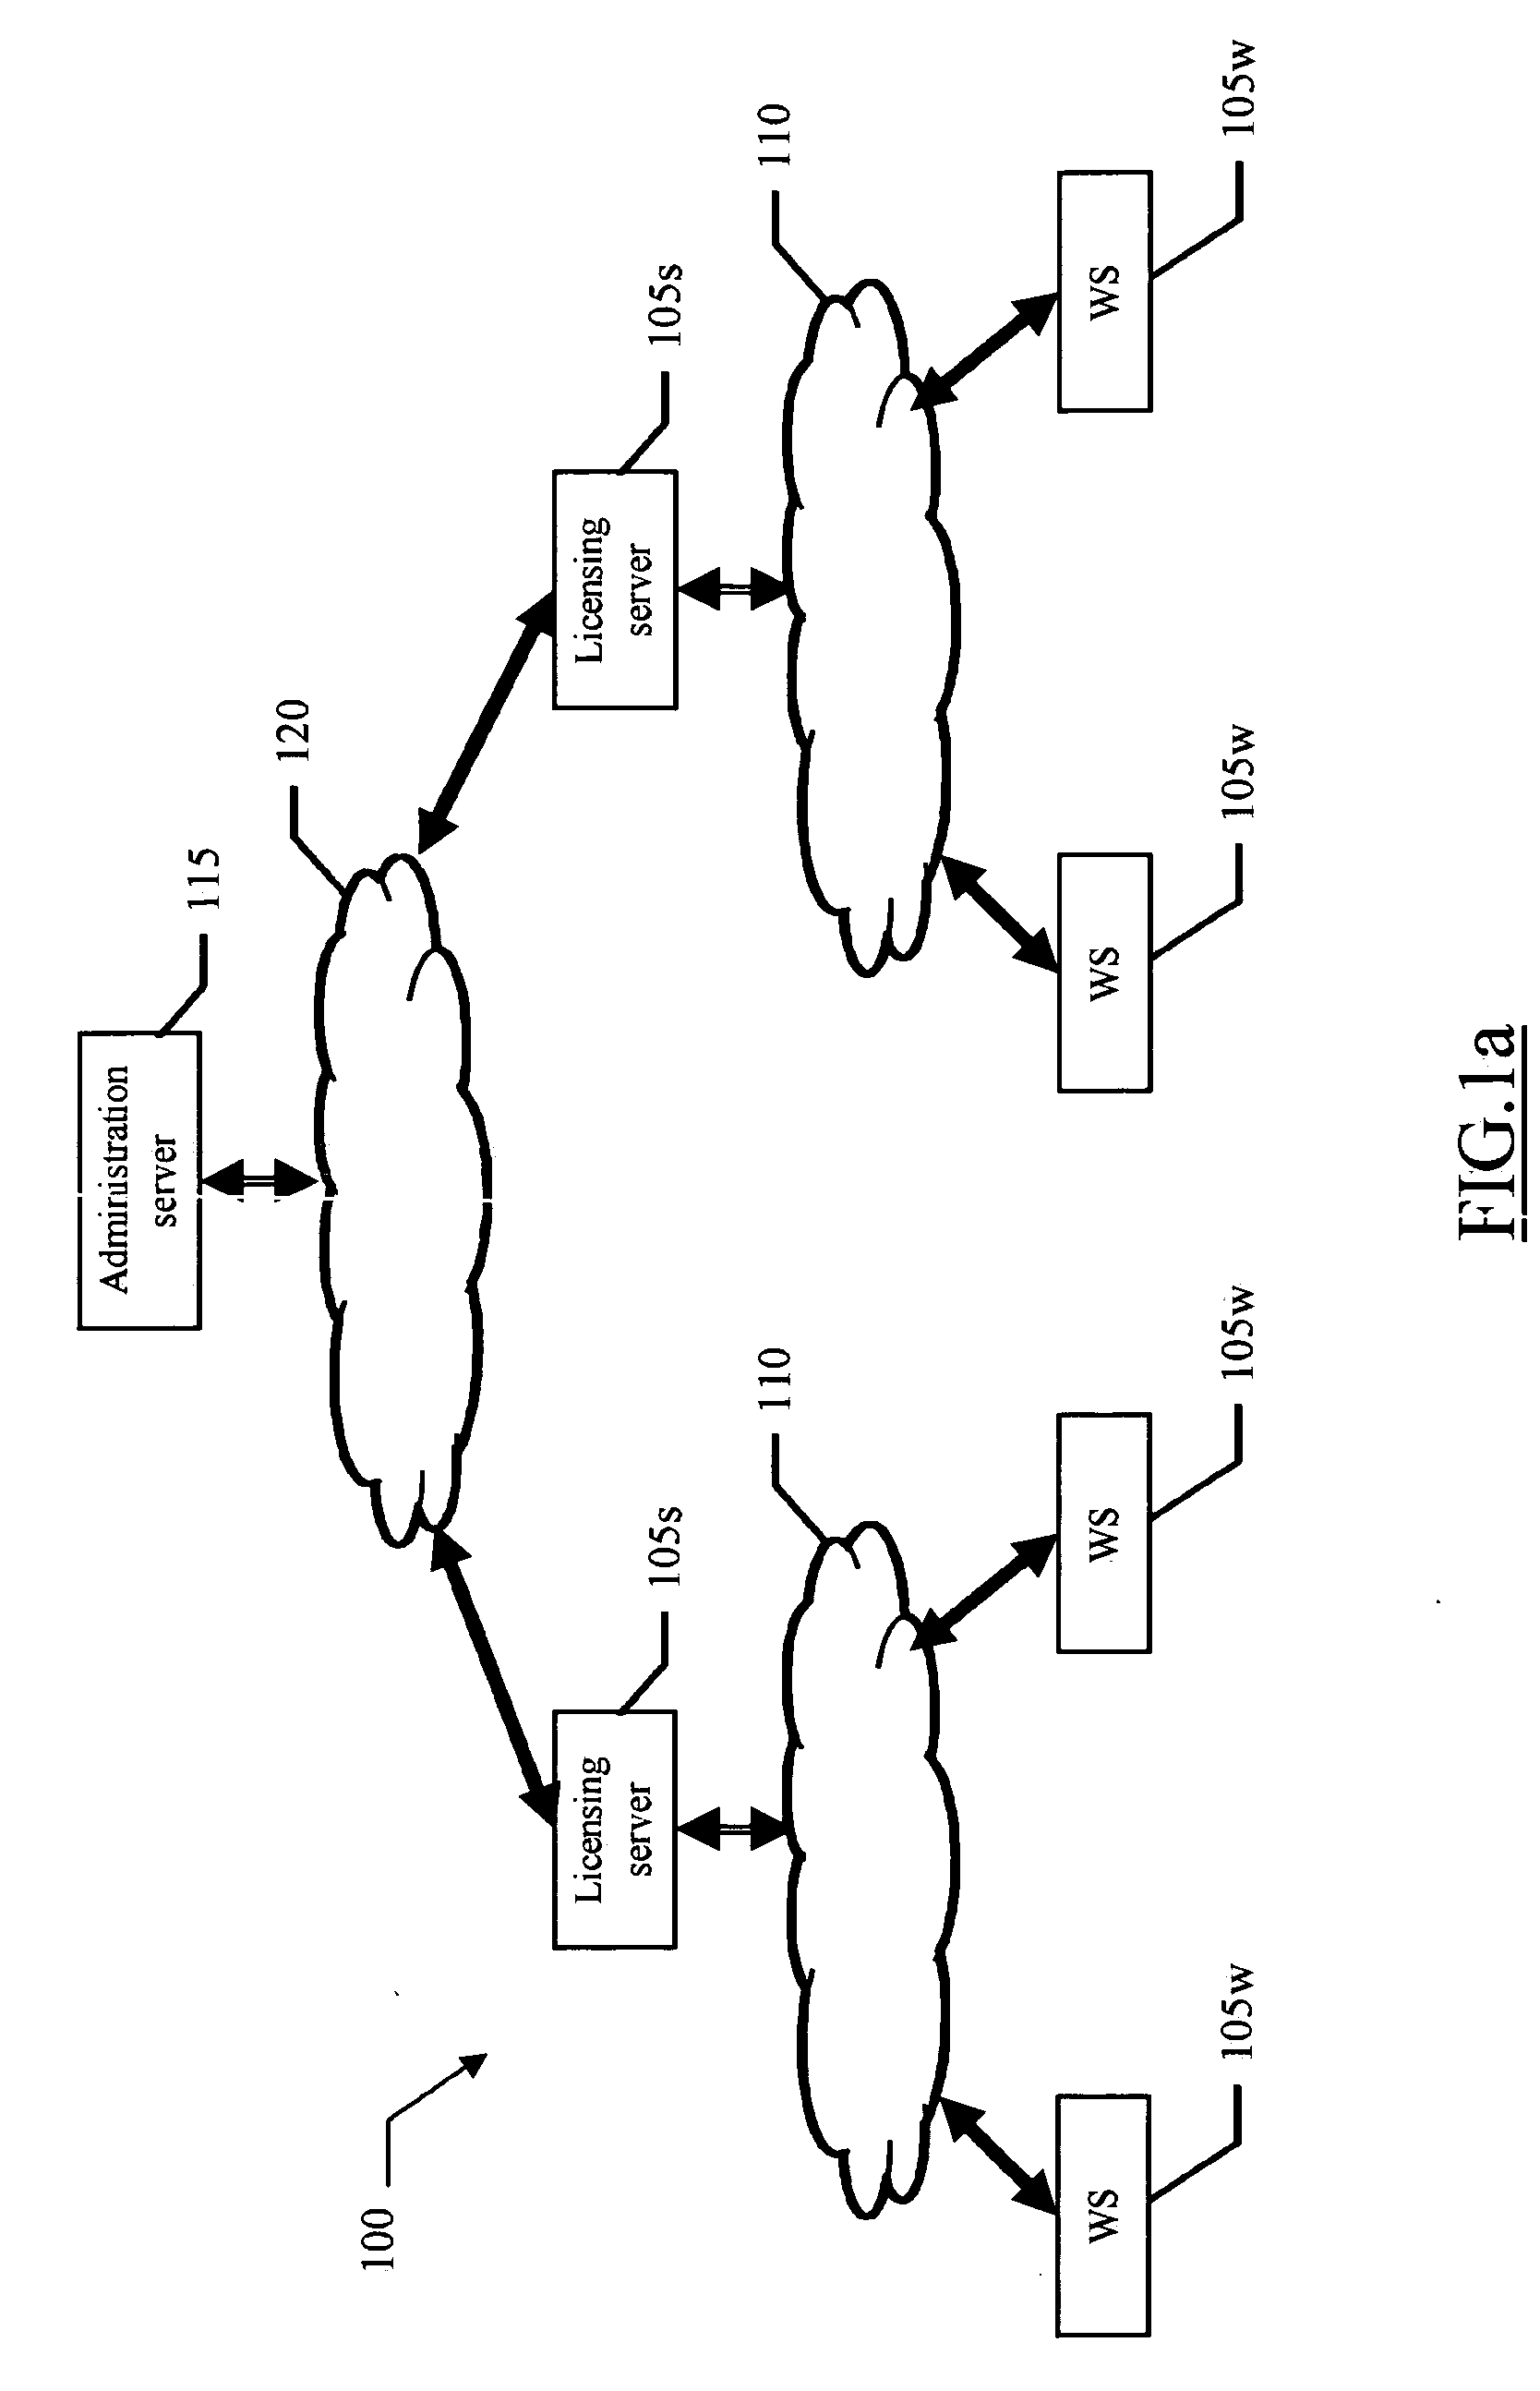 Method and apparatus for metering usage of software products using multiple signatures